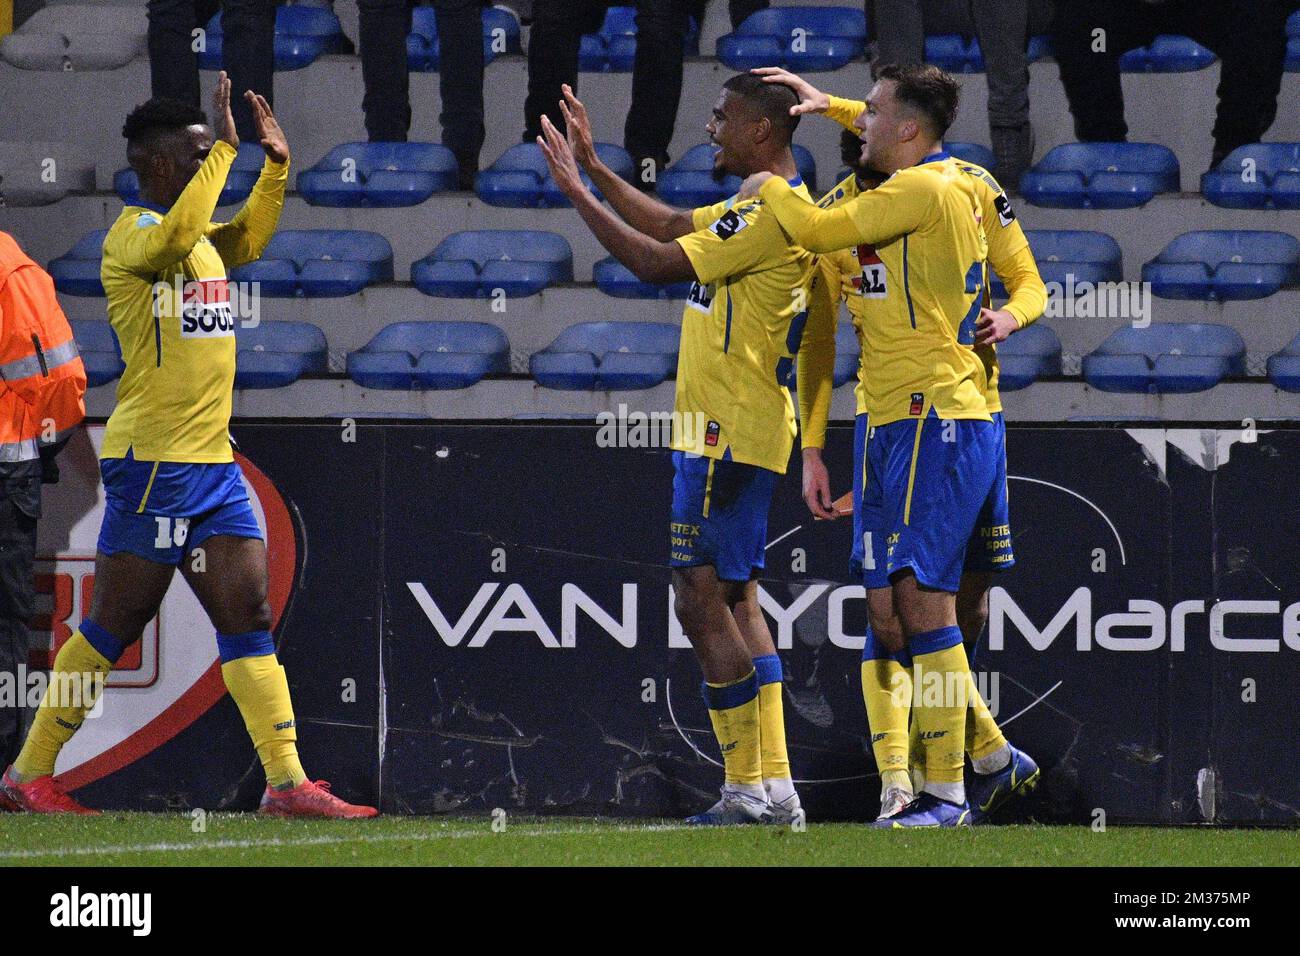 Westerlo's Kouya Mabea, Westerlo's Lyle Foster and Westerlo's Erdon Daci celebrate after scoring during a soccer match between Westerlo and RE Mouscron, Sunday 05 December 2021 in Westerlo, on day 14 of the 'D1B Pro League' second division of the Belgian soccer championship. BELGA PHOTO DAVID PINTENS Stock Photo